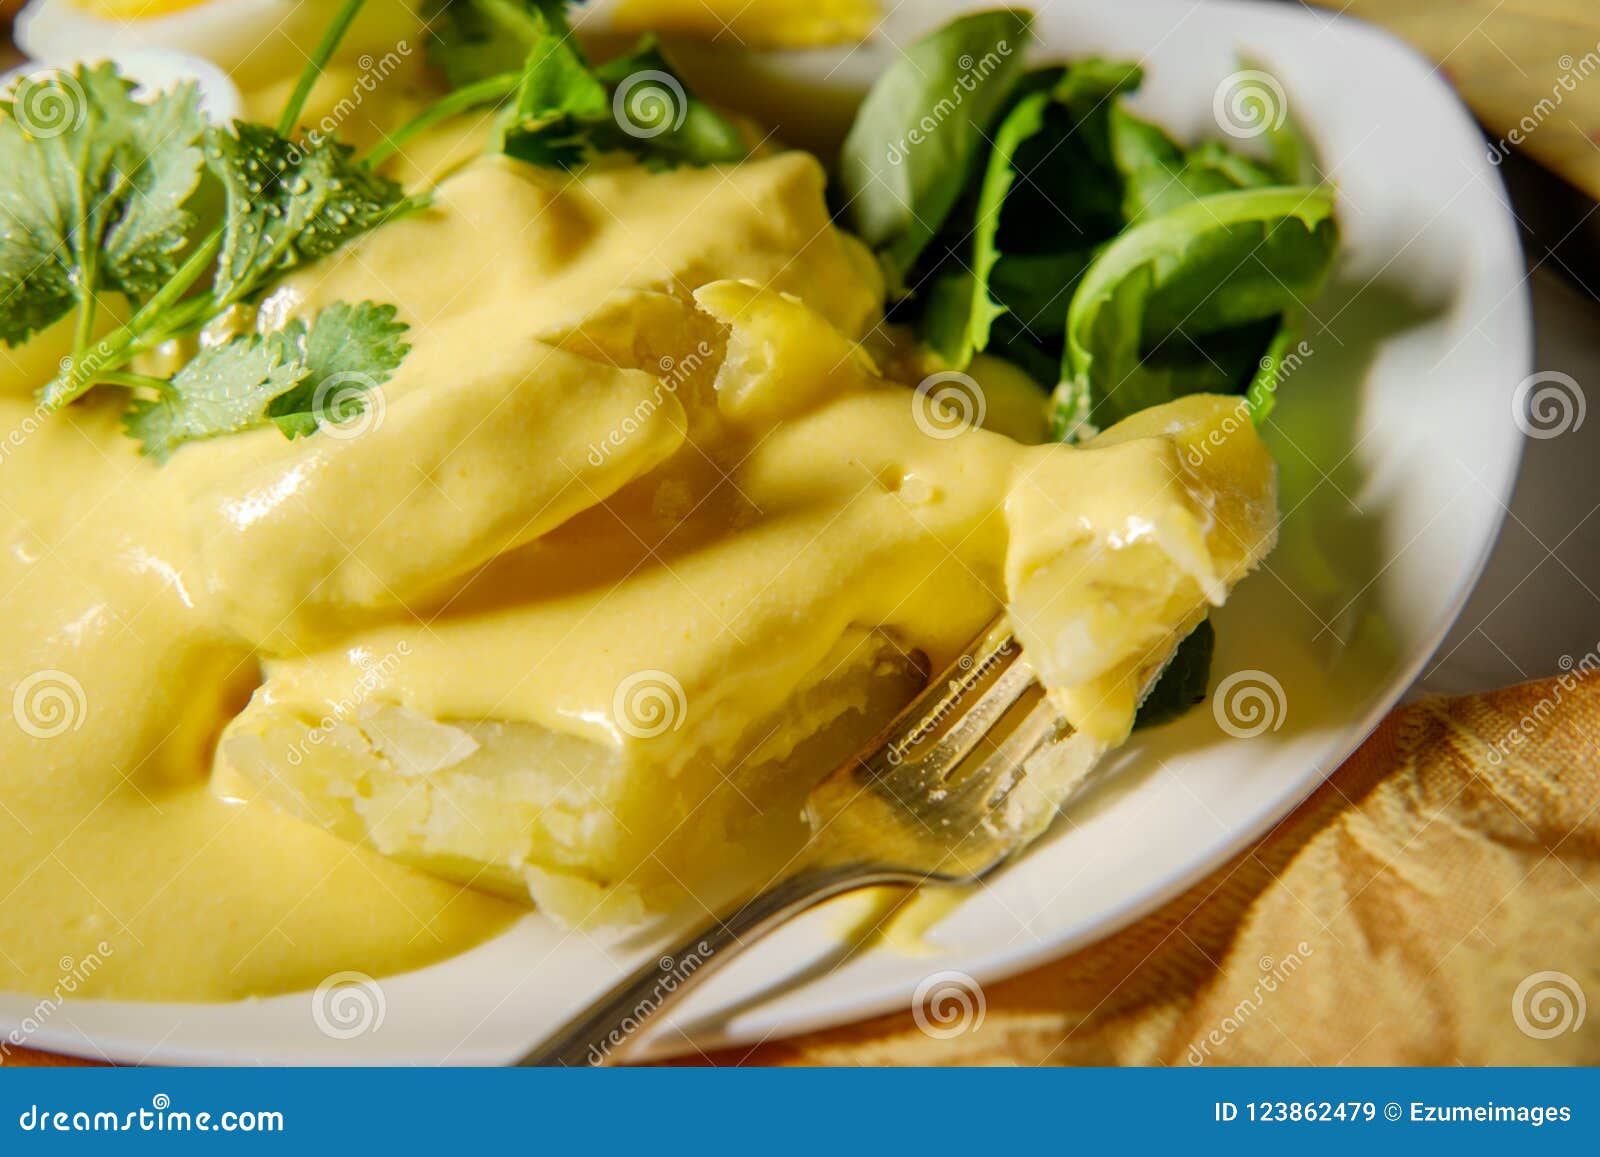 Papa A La Huancaina Stock Image Image Of Cheese Cilantro 123862479,Carpenter Ants With Wings In House